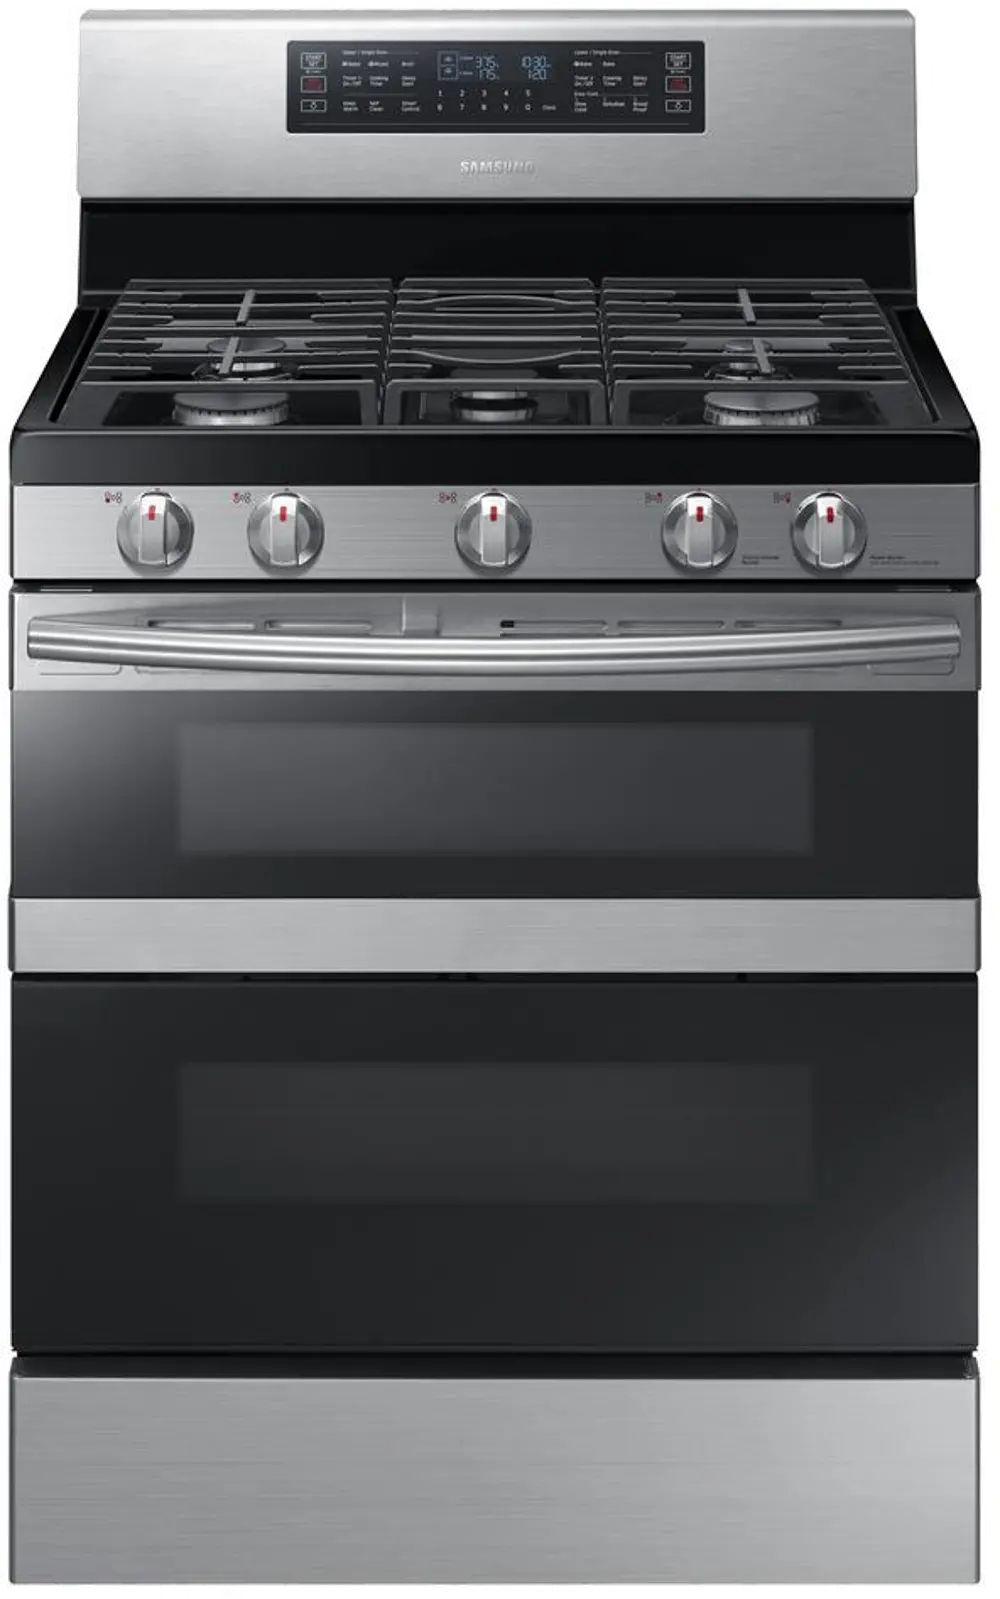 NX58M6850SS Samsung Double Oven Gas Range  -  5.8 cu. ft. Stainless Steel-1